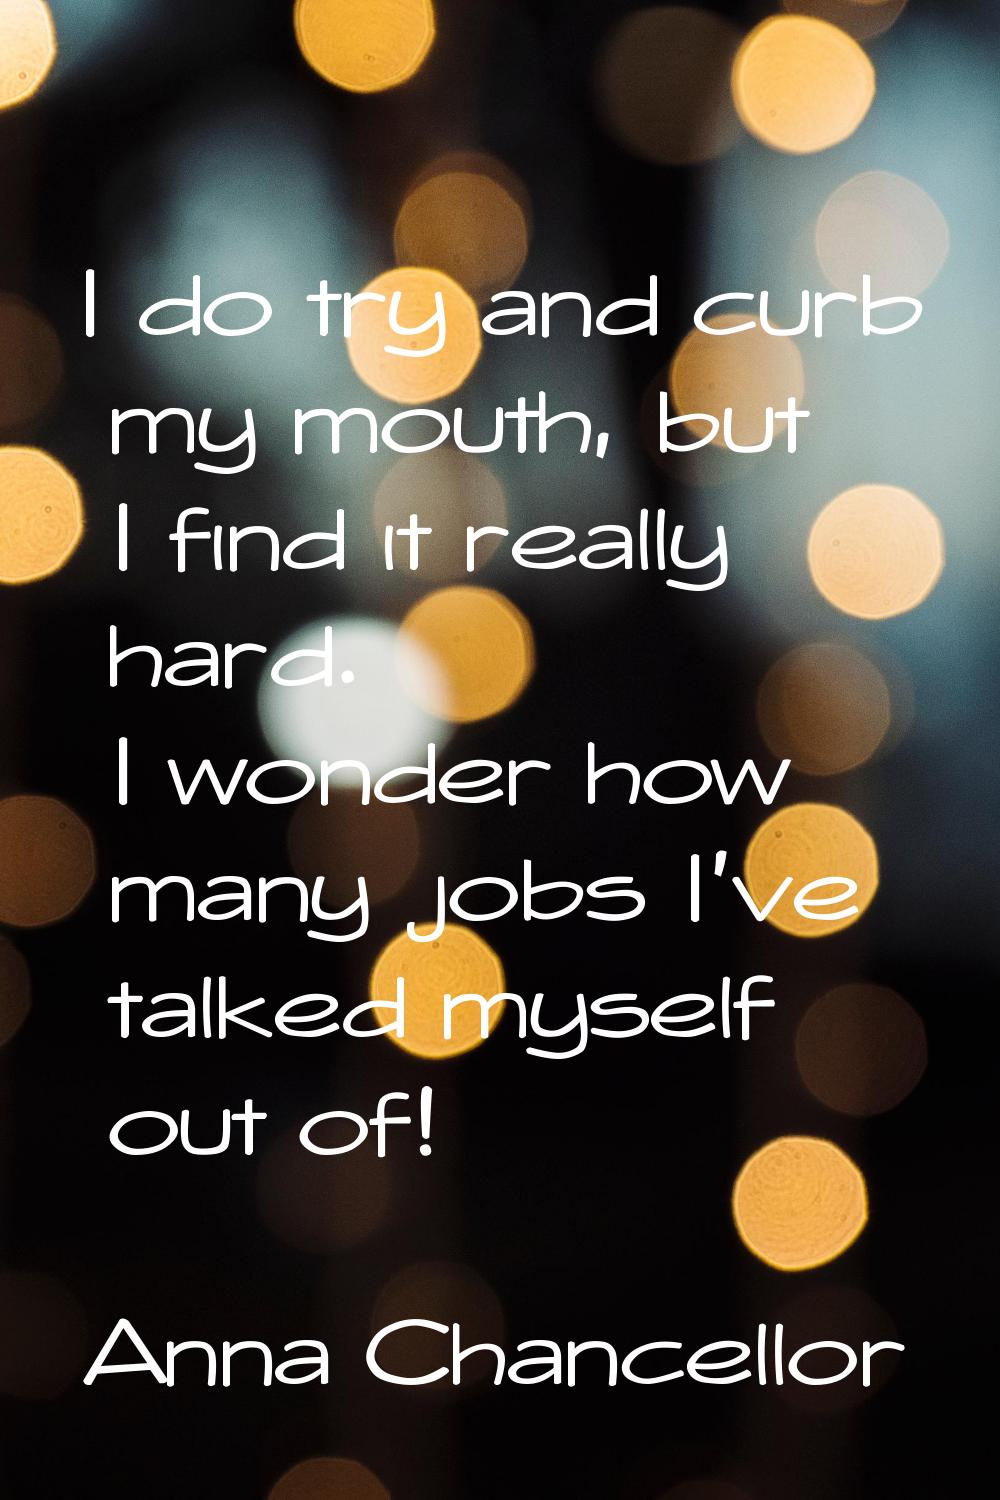 I do try and curb my mouth, but I find it really hard. I wonder how many jobs I've talked myself ou